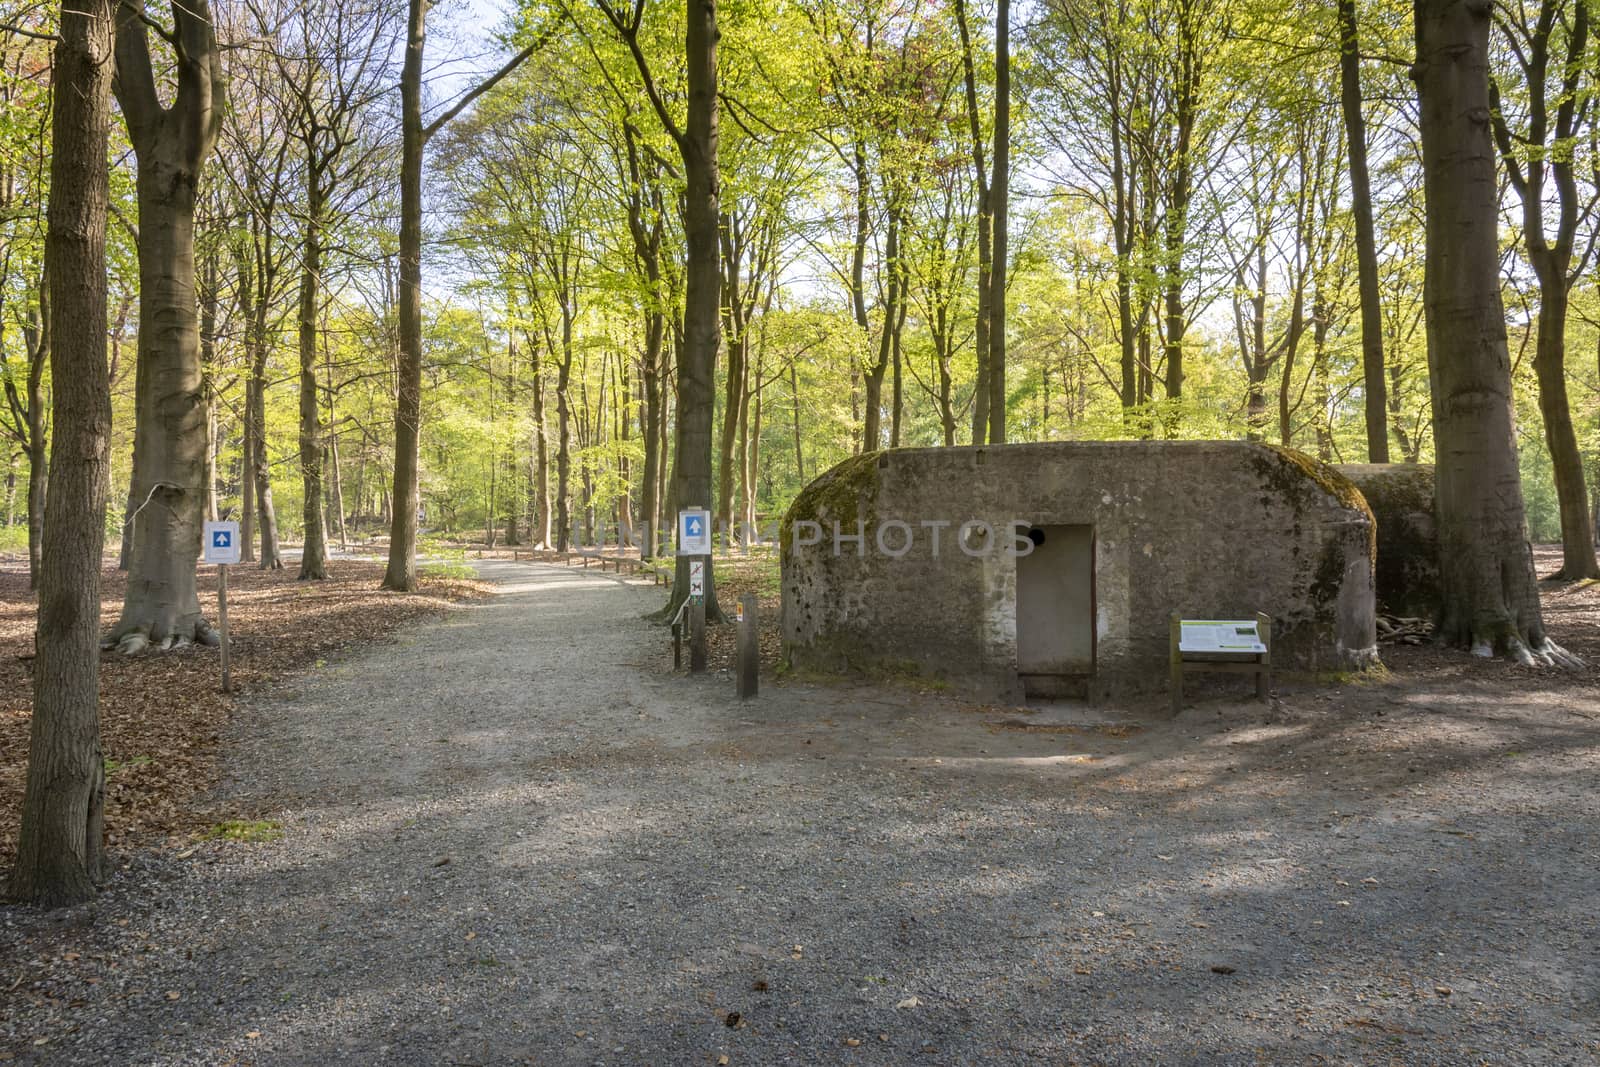 Start of the Loopgravenpad, walkway through trenches, on the historical Flanders Fields site in Mastenbos, Kapellen. German bunker in background. by kb79